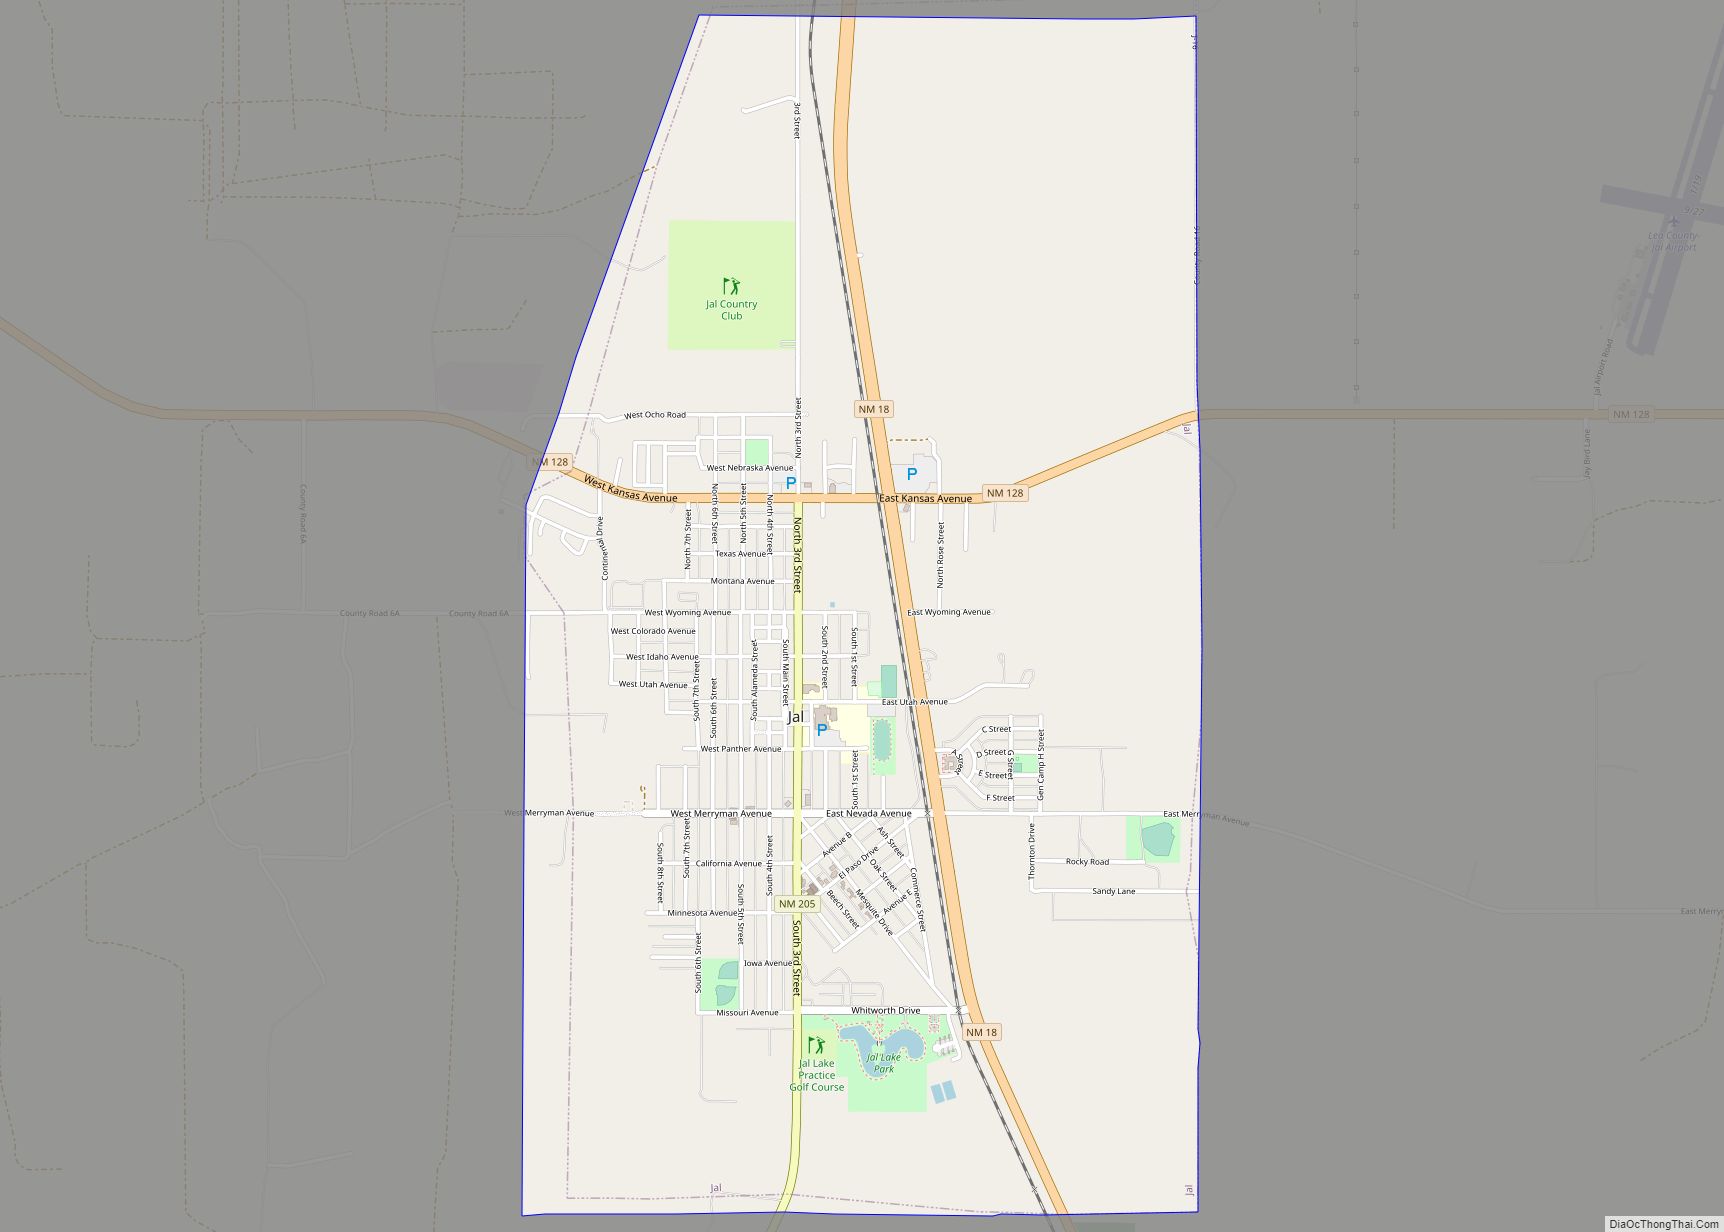 Map of Jal city